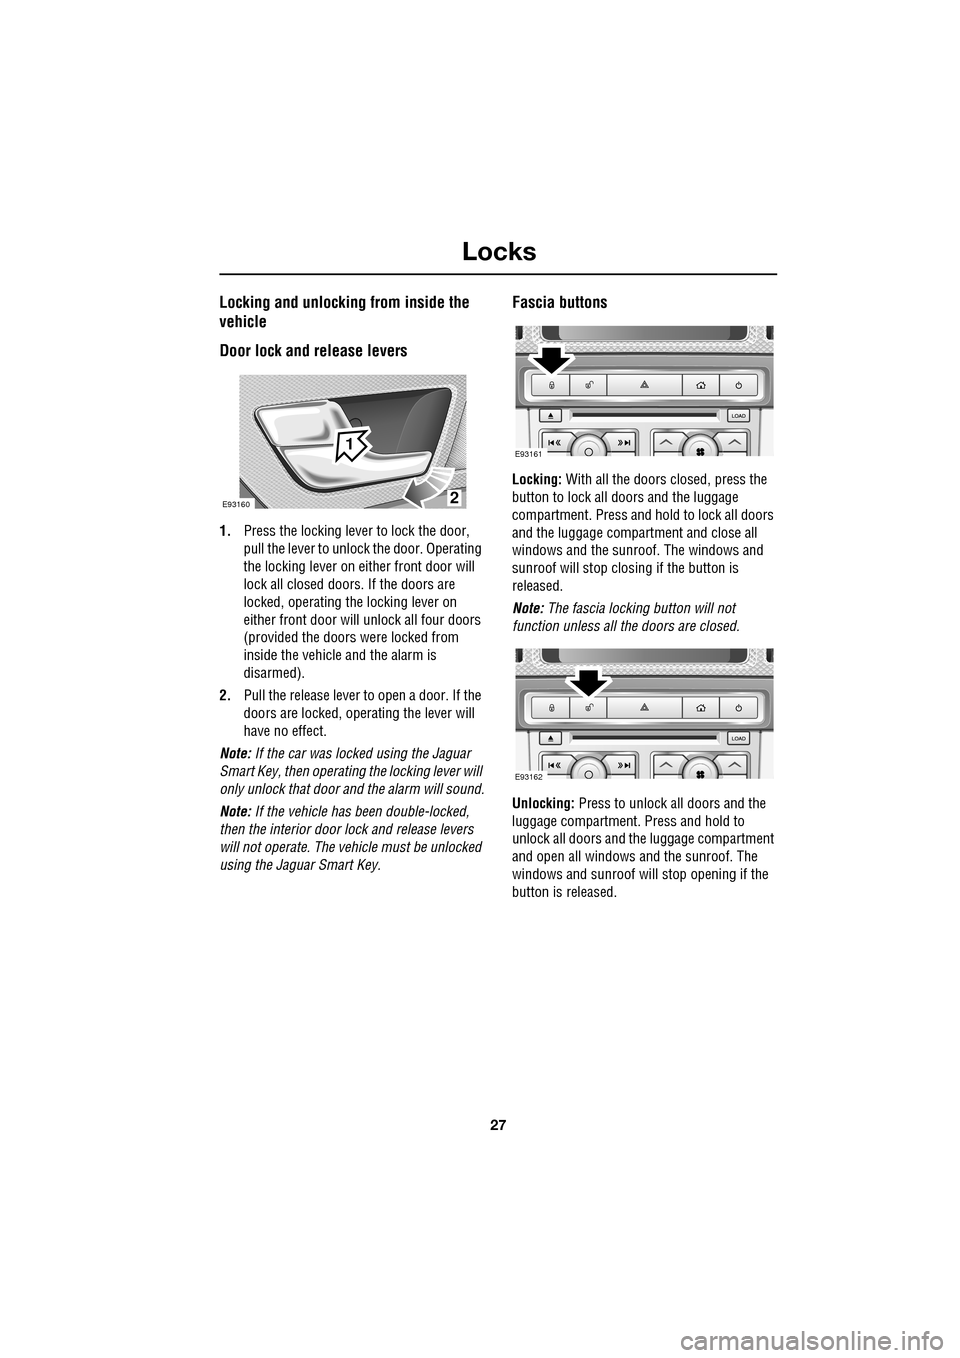 JAGUAR XF 2009 1.G User Guide 27
Locks
               
Locking and unlocking from inside the 
vehicle
Door lock and release levers
1.Press the locking lever to lock the door, 
pull the lever to unlock the door. Operating 
the lock